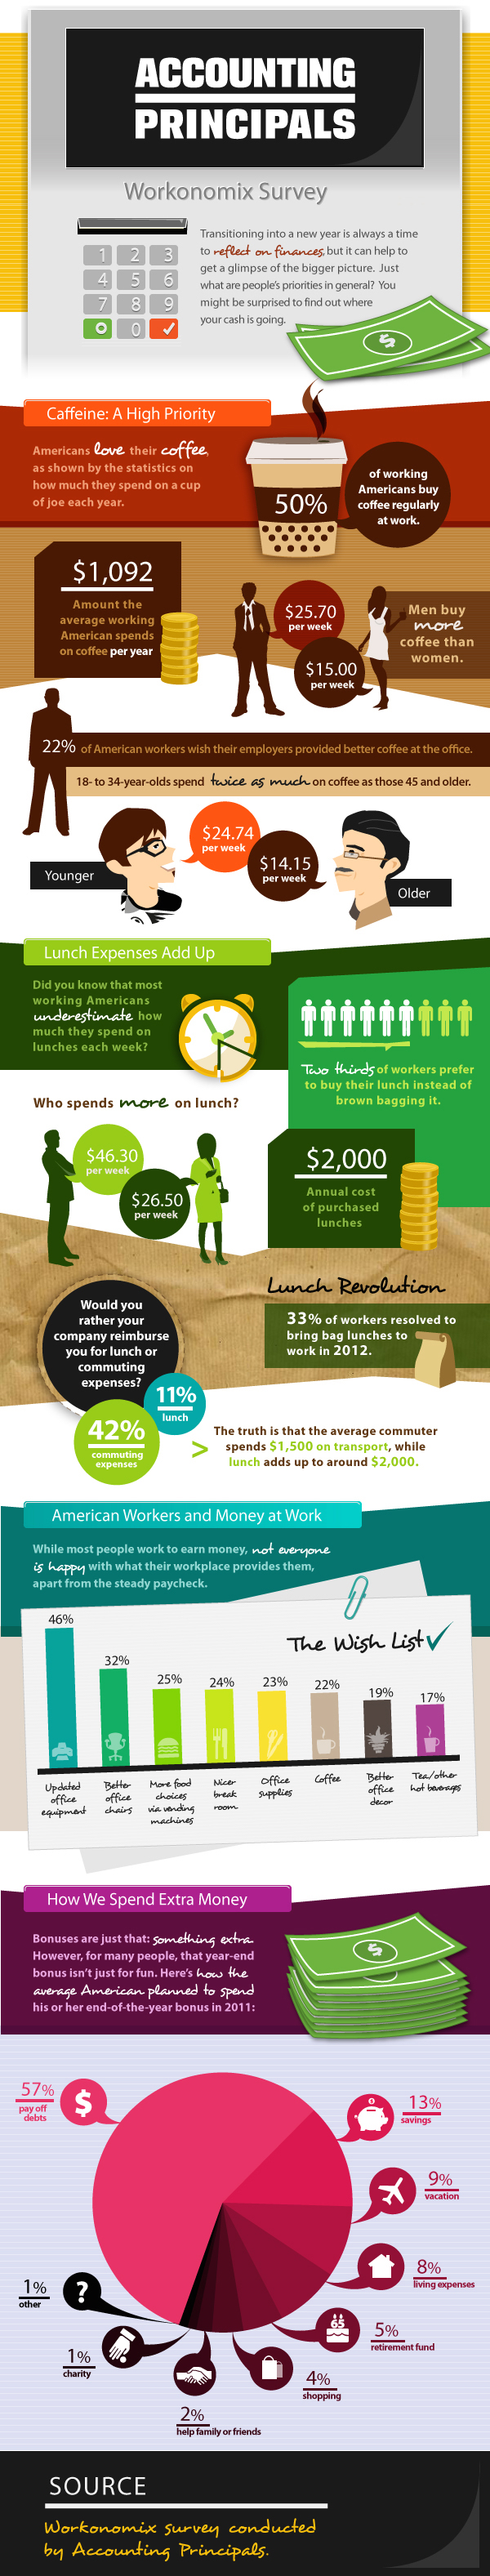 Infographic: How much are Americans spending on Coffee every year?